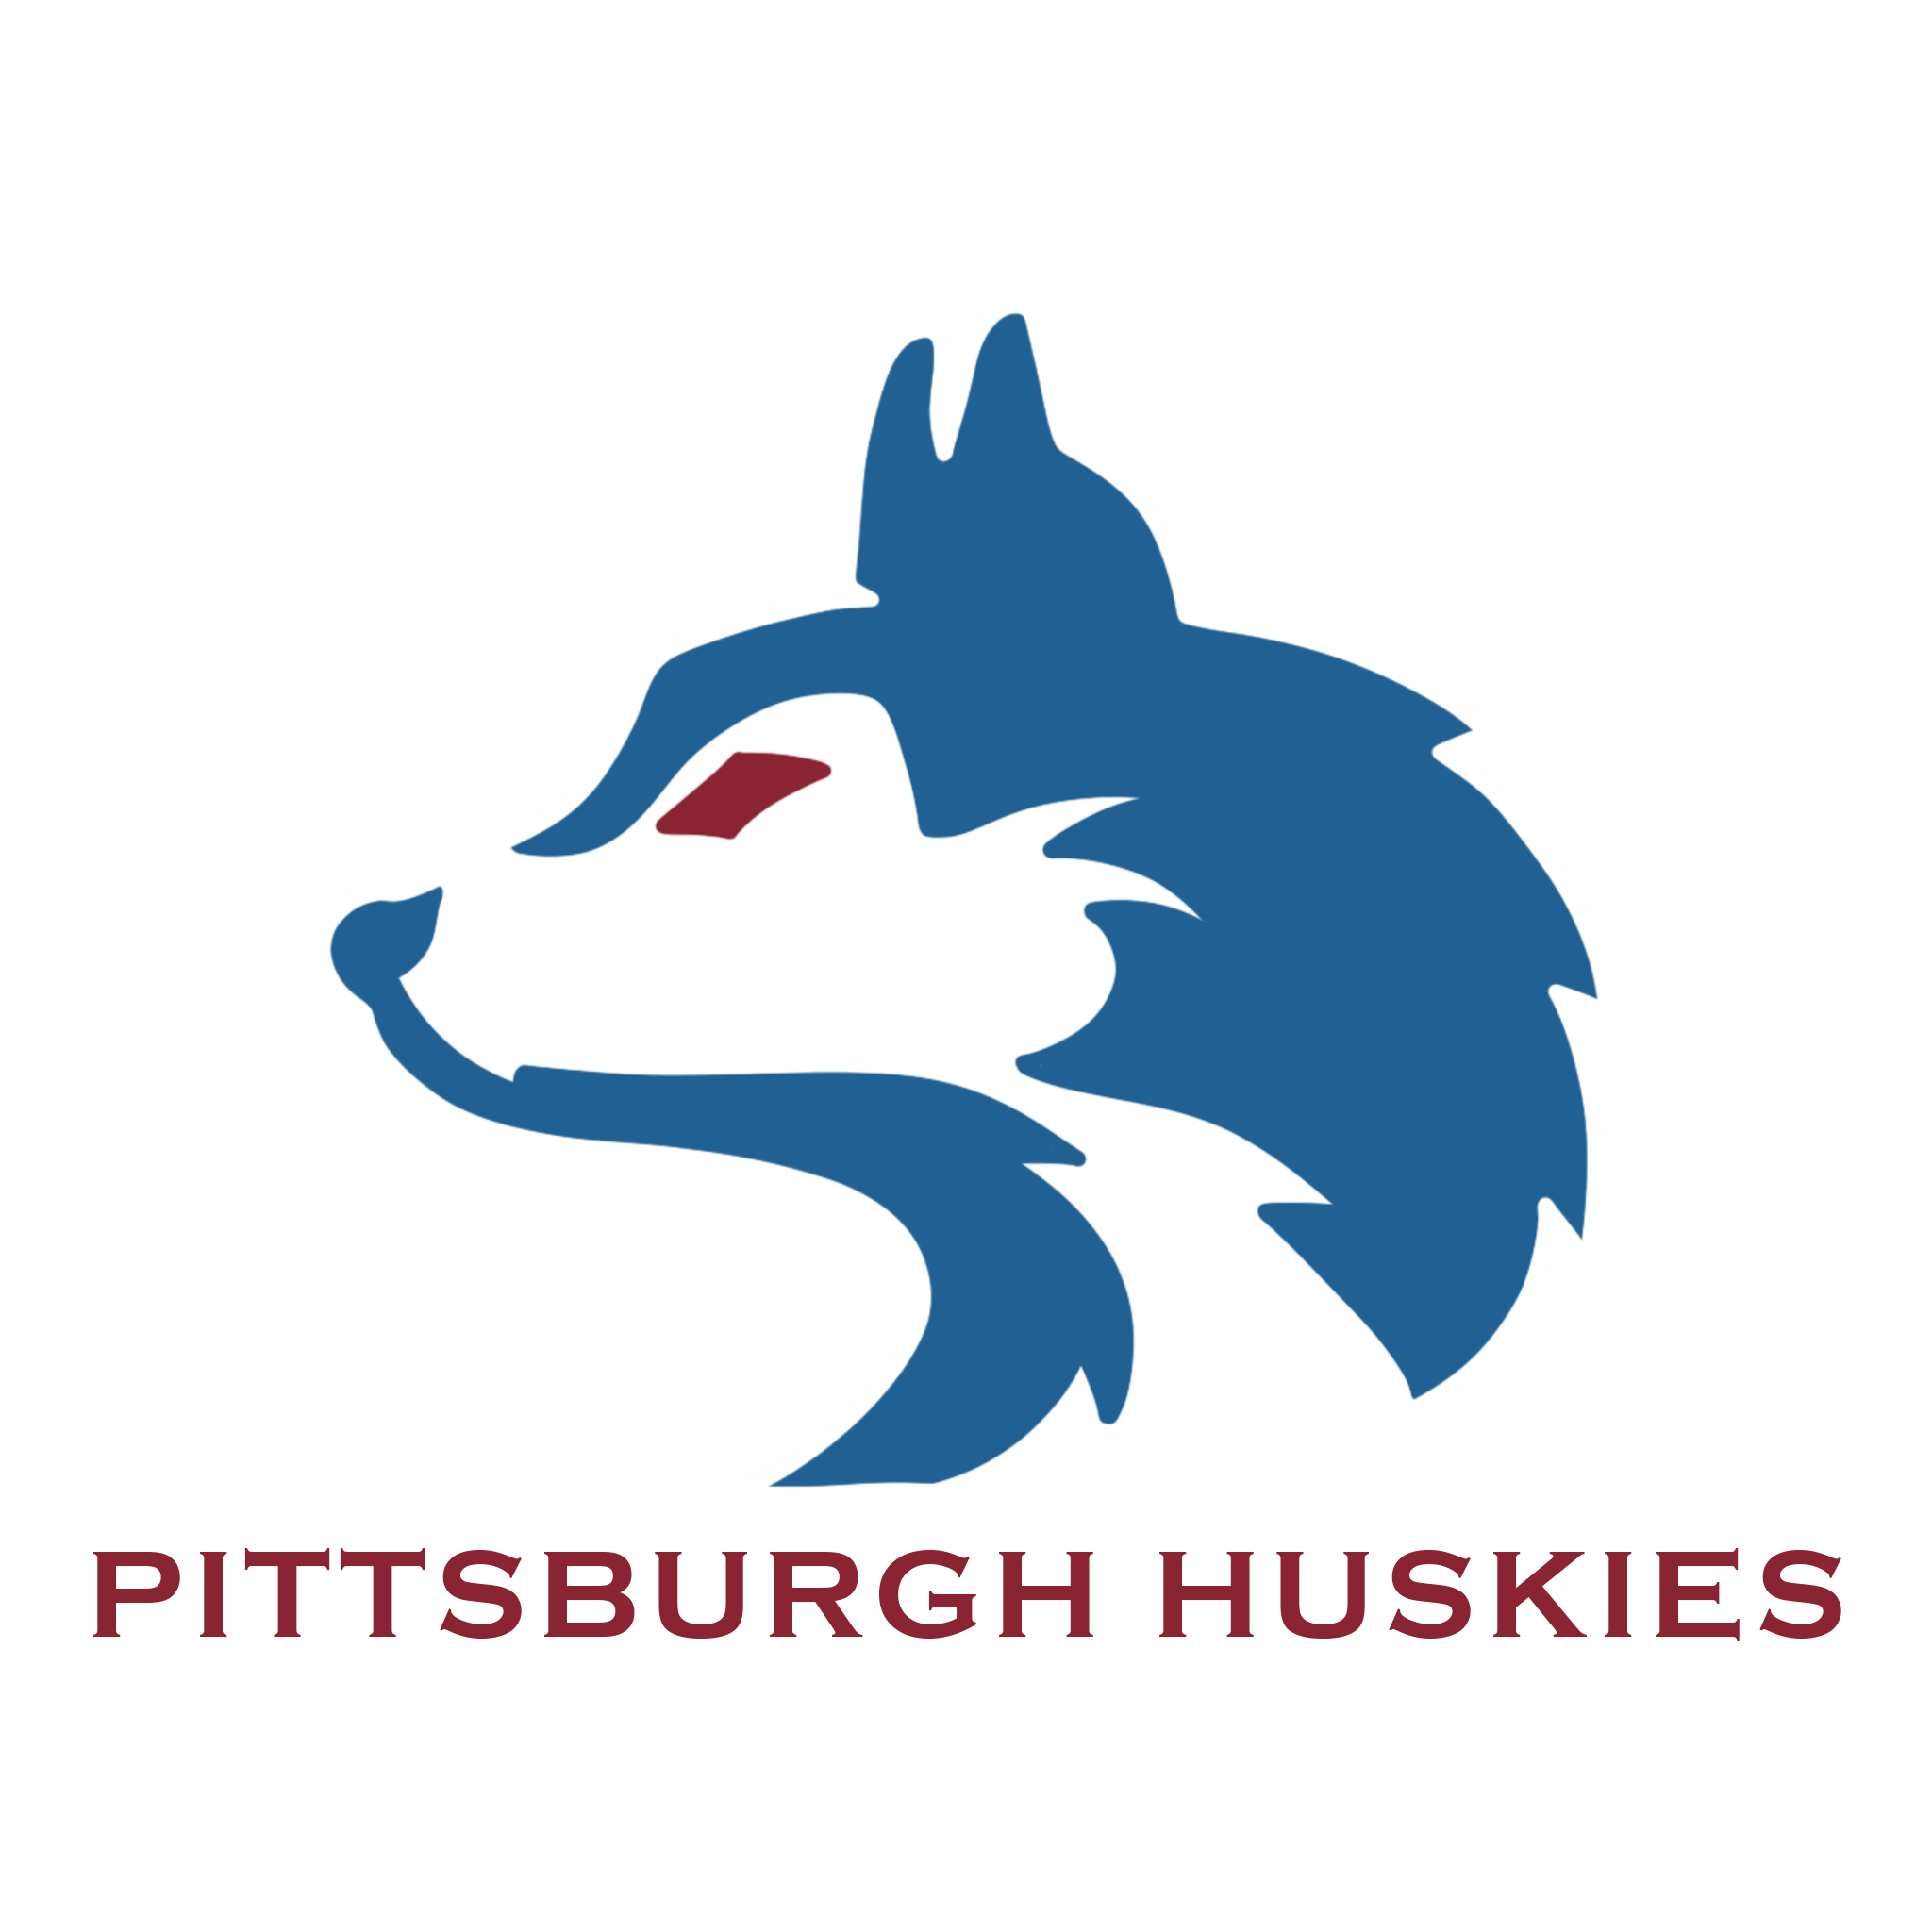 Pittsburgh_Huskies_Blue with Text